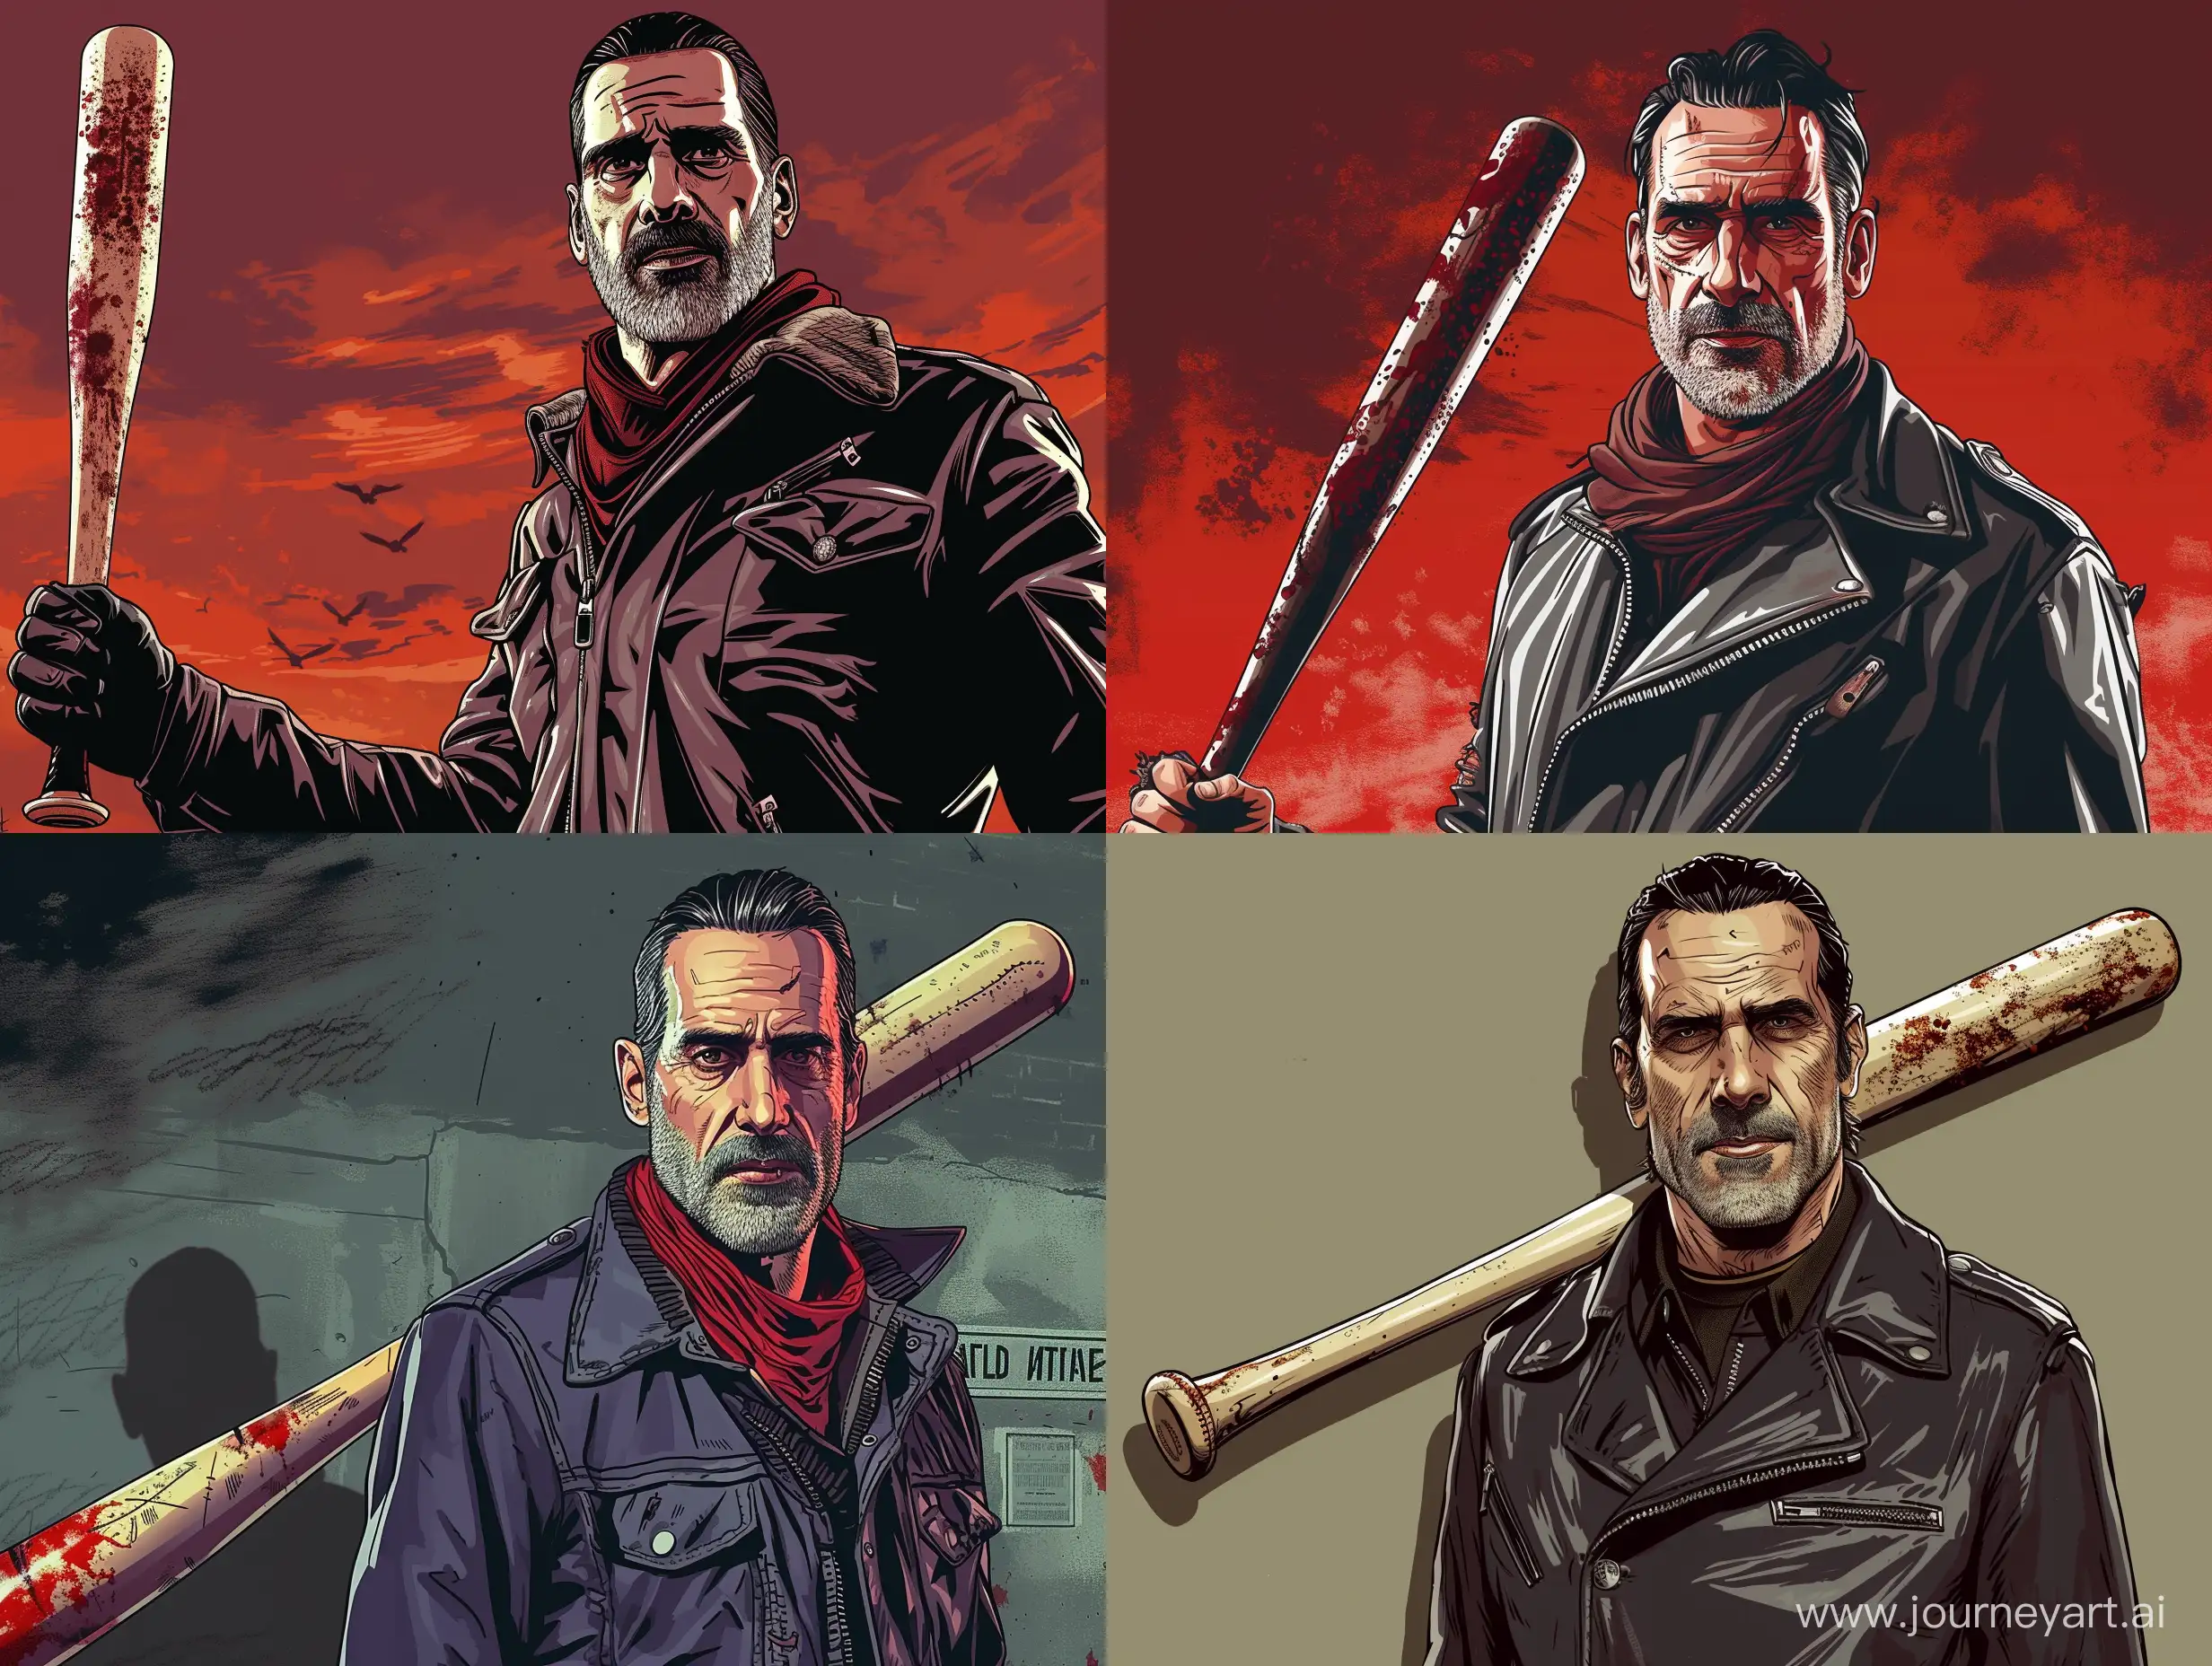 GTA-V-Style-Illustration-of-Negan-and-Lucille-from-The-Walking-Dead